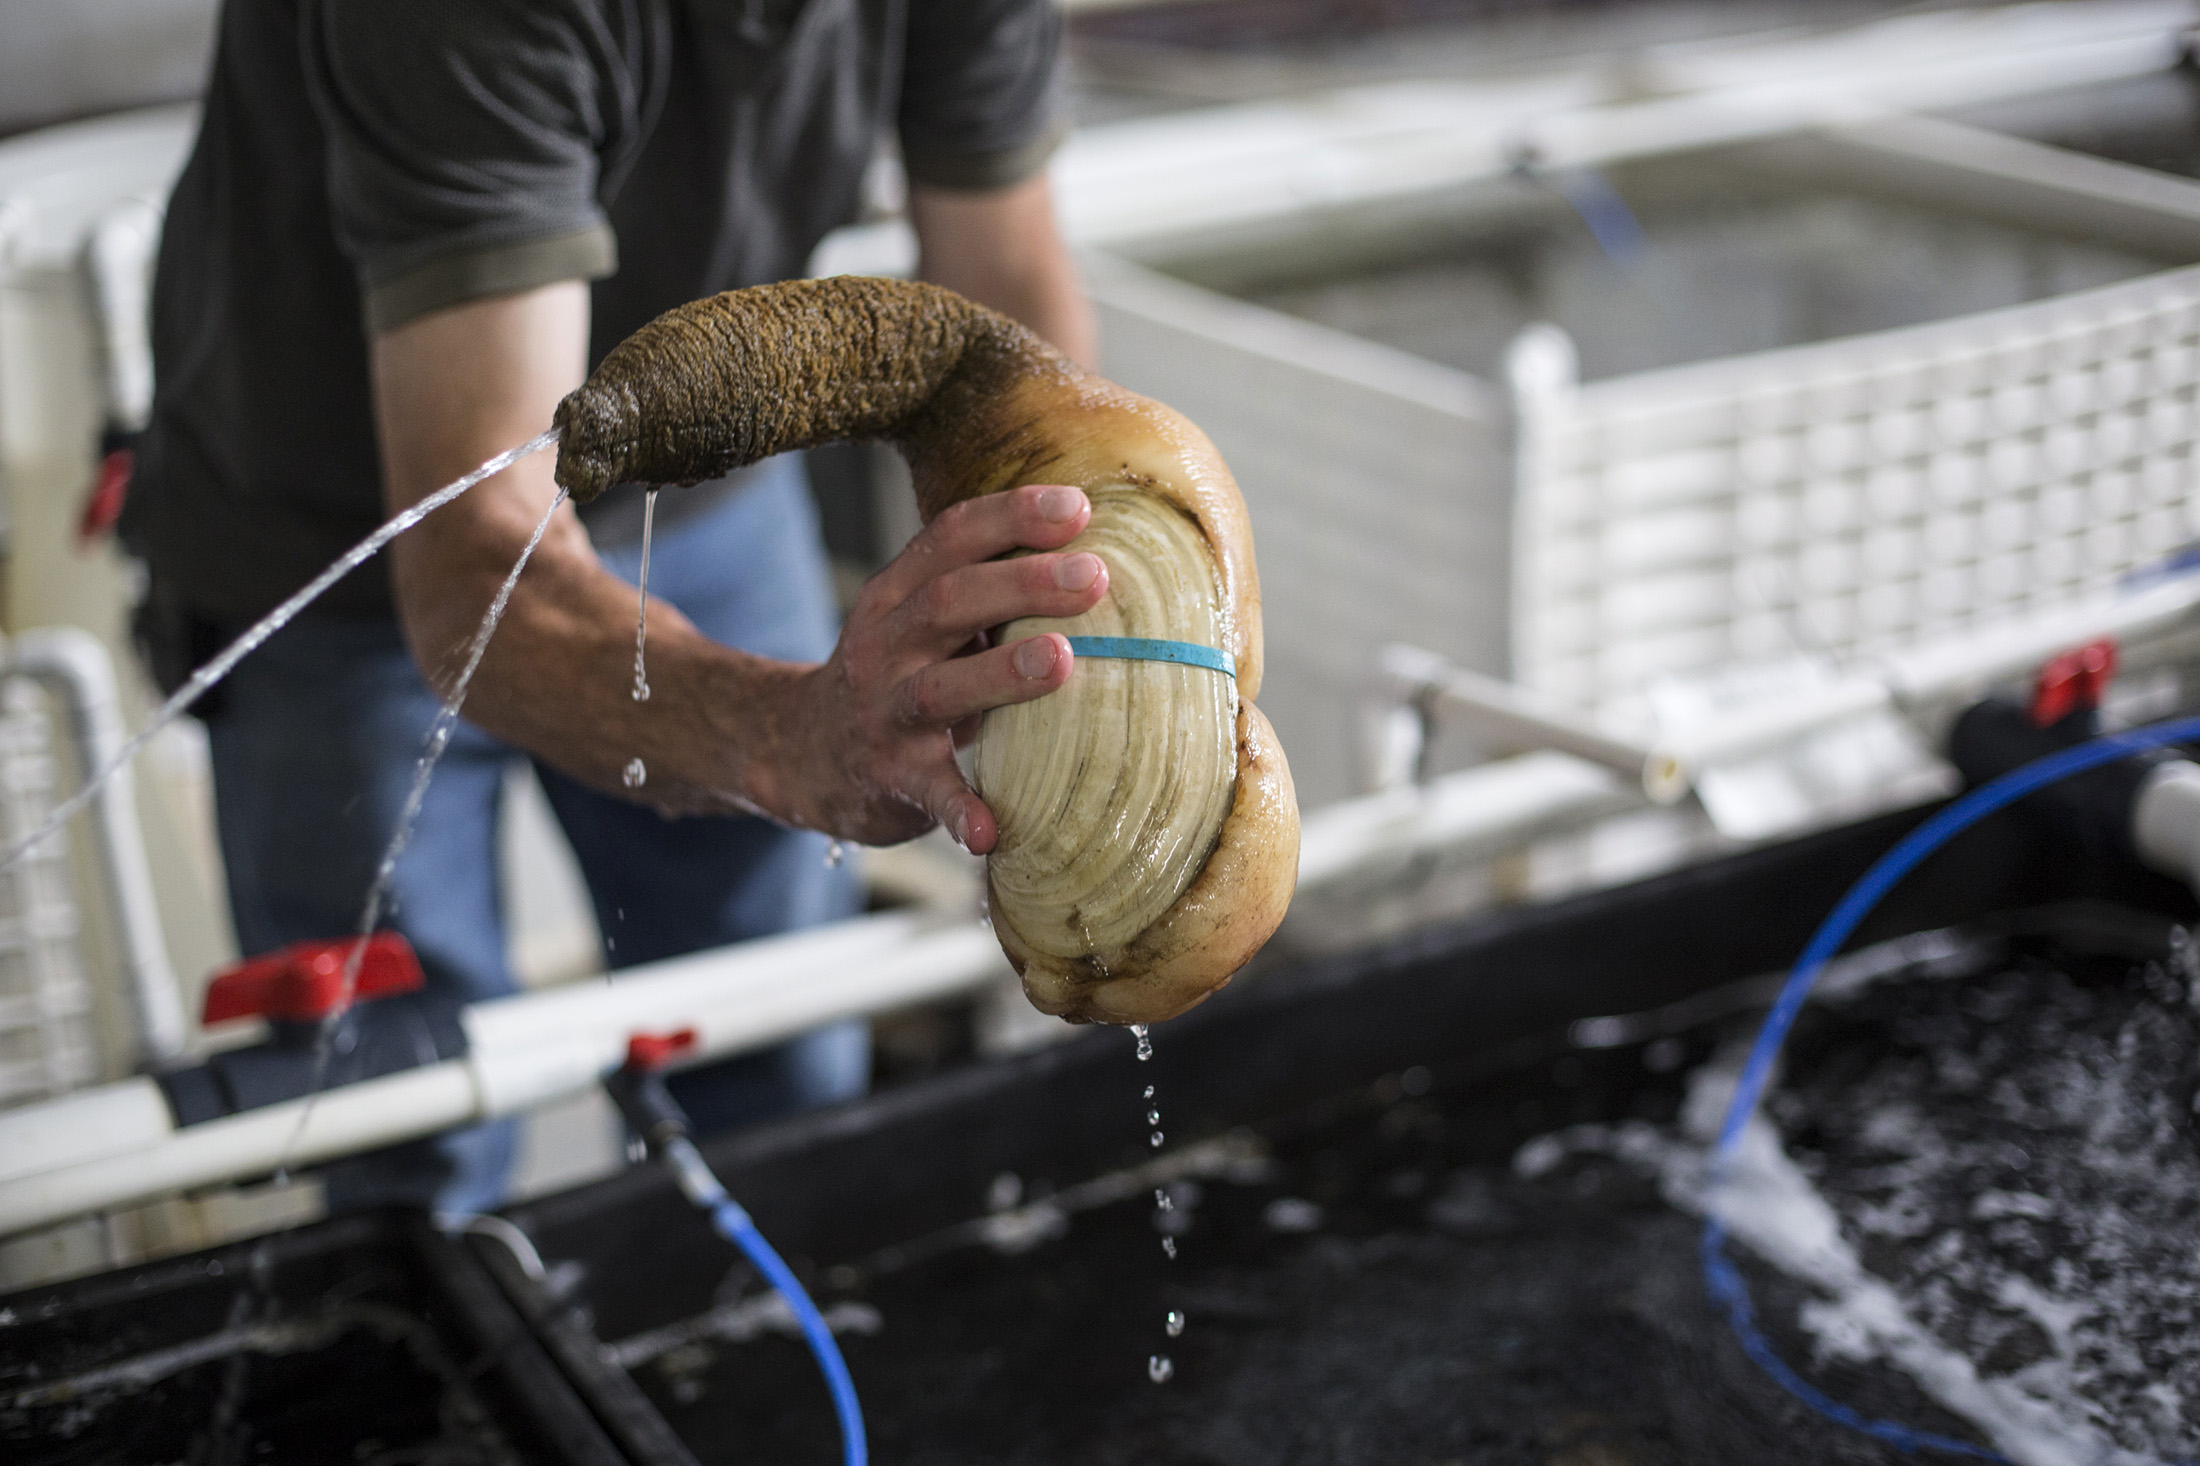 Follow A Geoduck The World S Most Nsfw Seafood From Mud To Plate Bloomberg